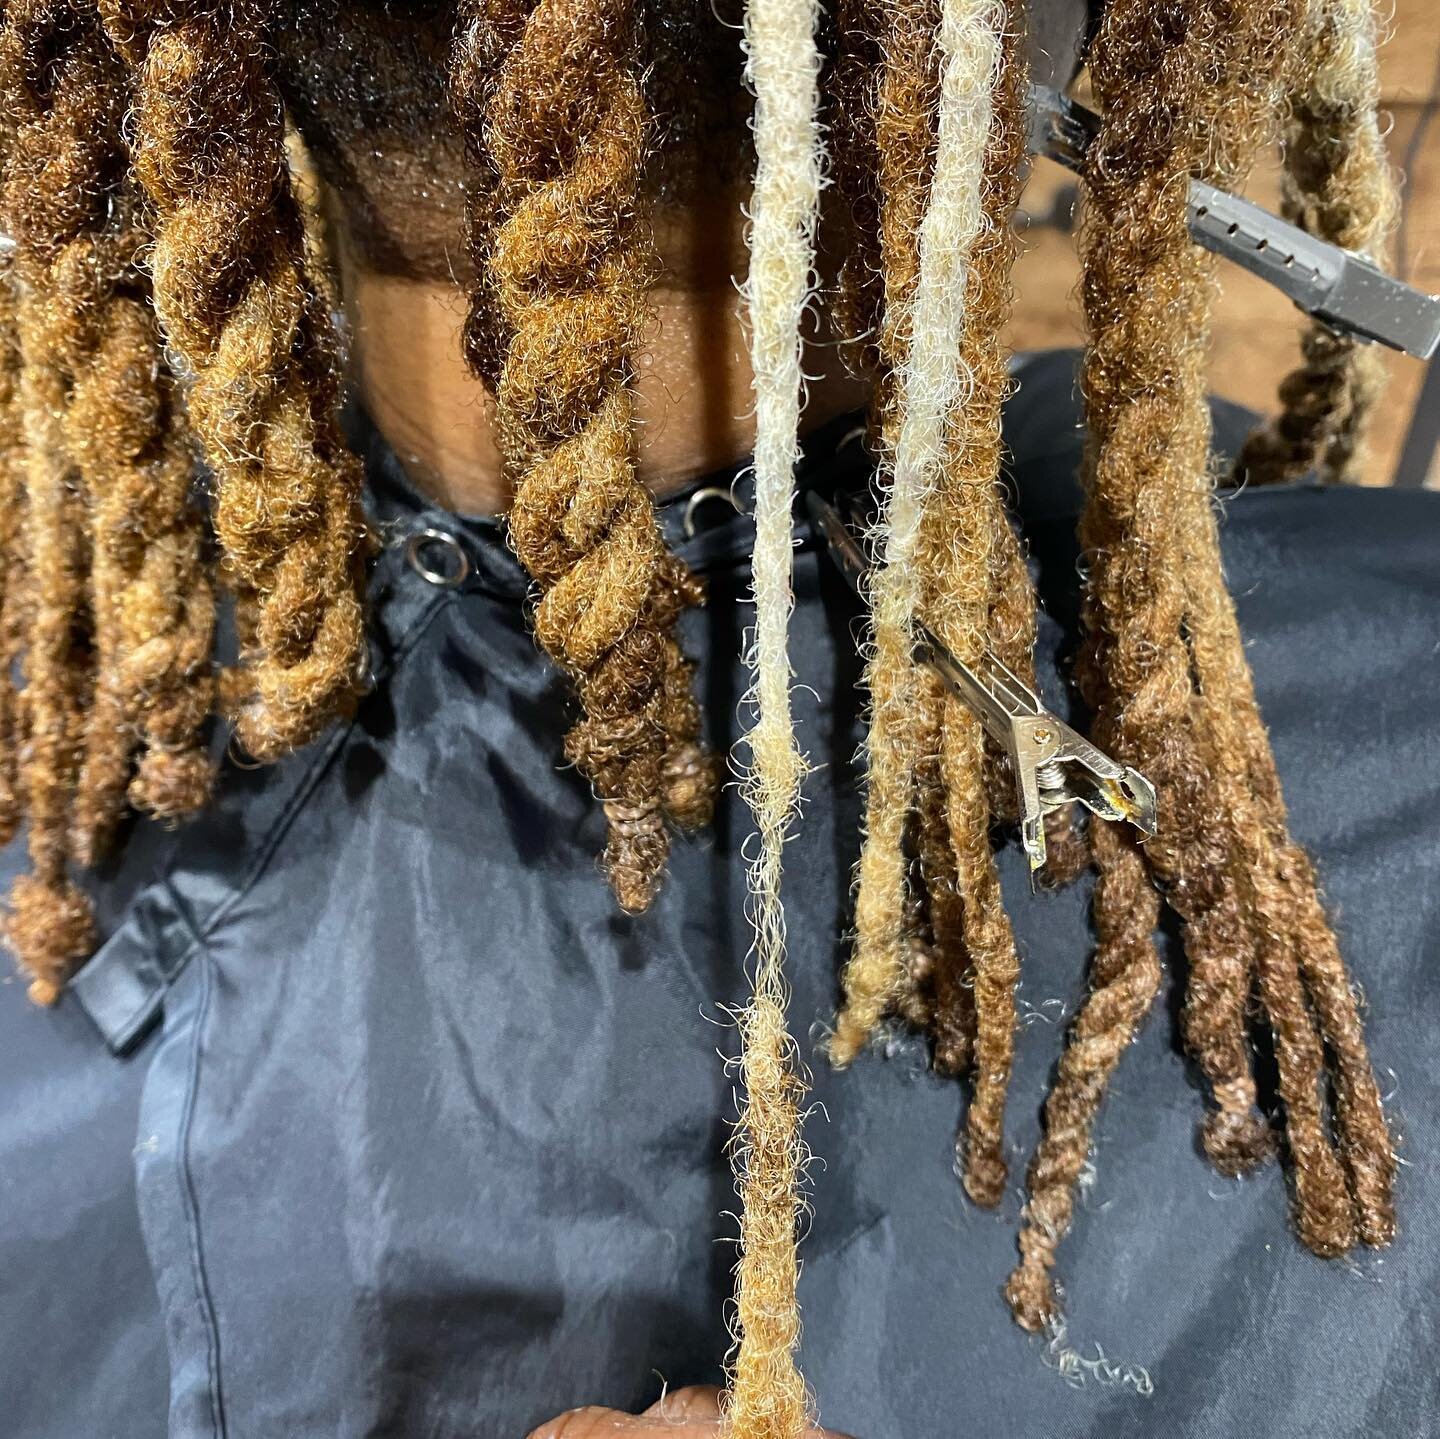 Loc restoration. Before and after. Using only the loc itself. No added hair or thread so it will continue to grow out naturally 
#locs #naturalhair #stllocs #stl #stlnaturalhair #theblvd #webstergroves